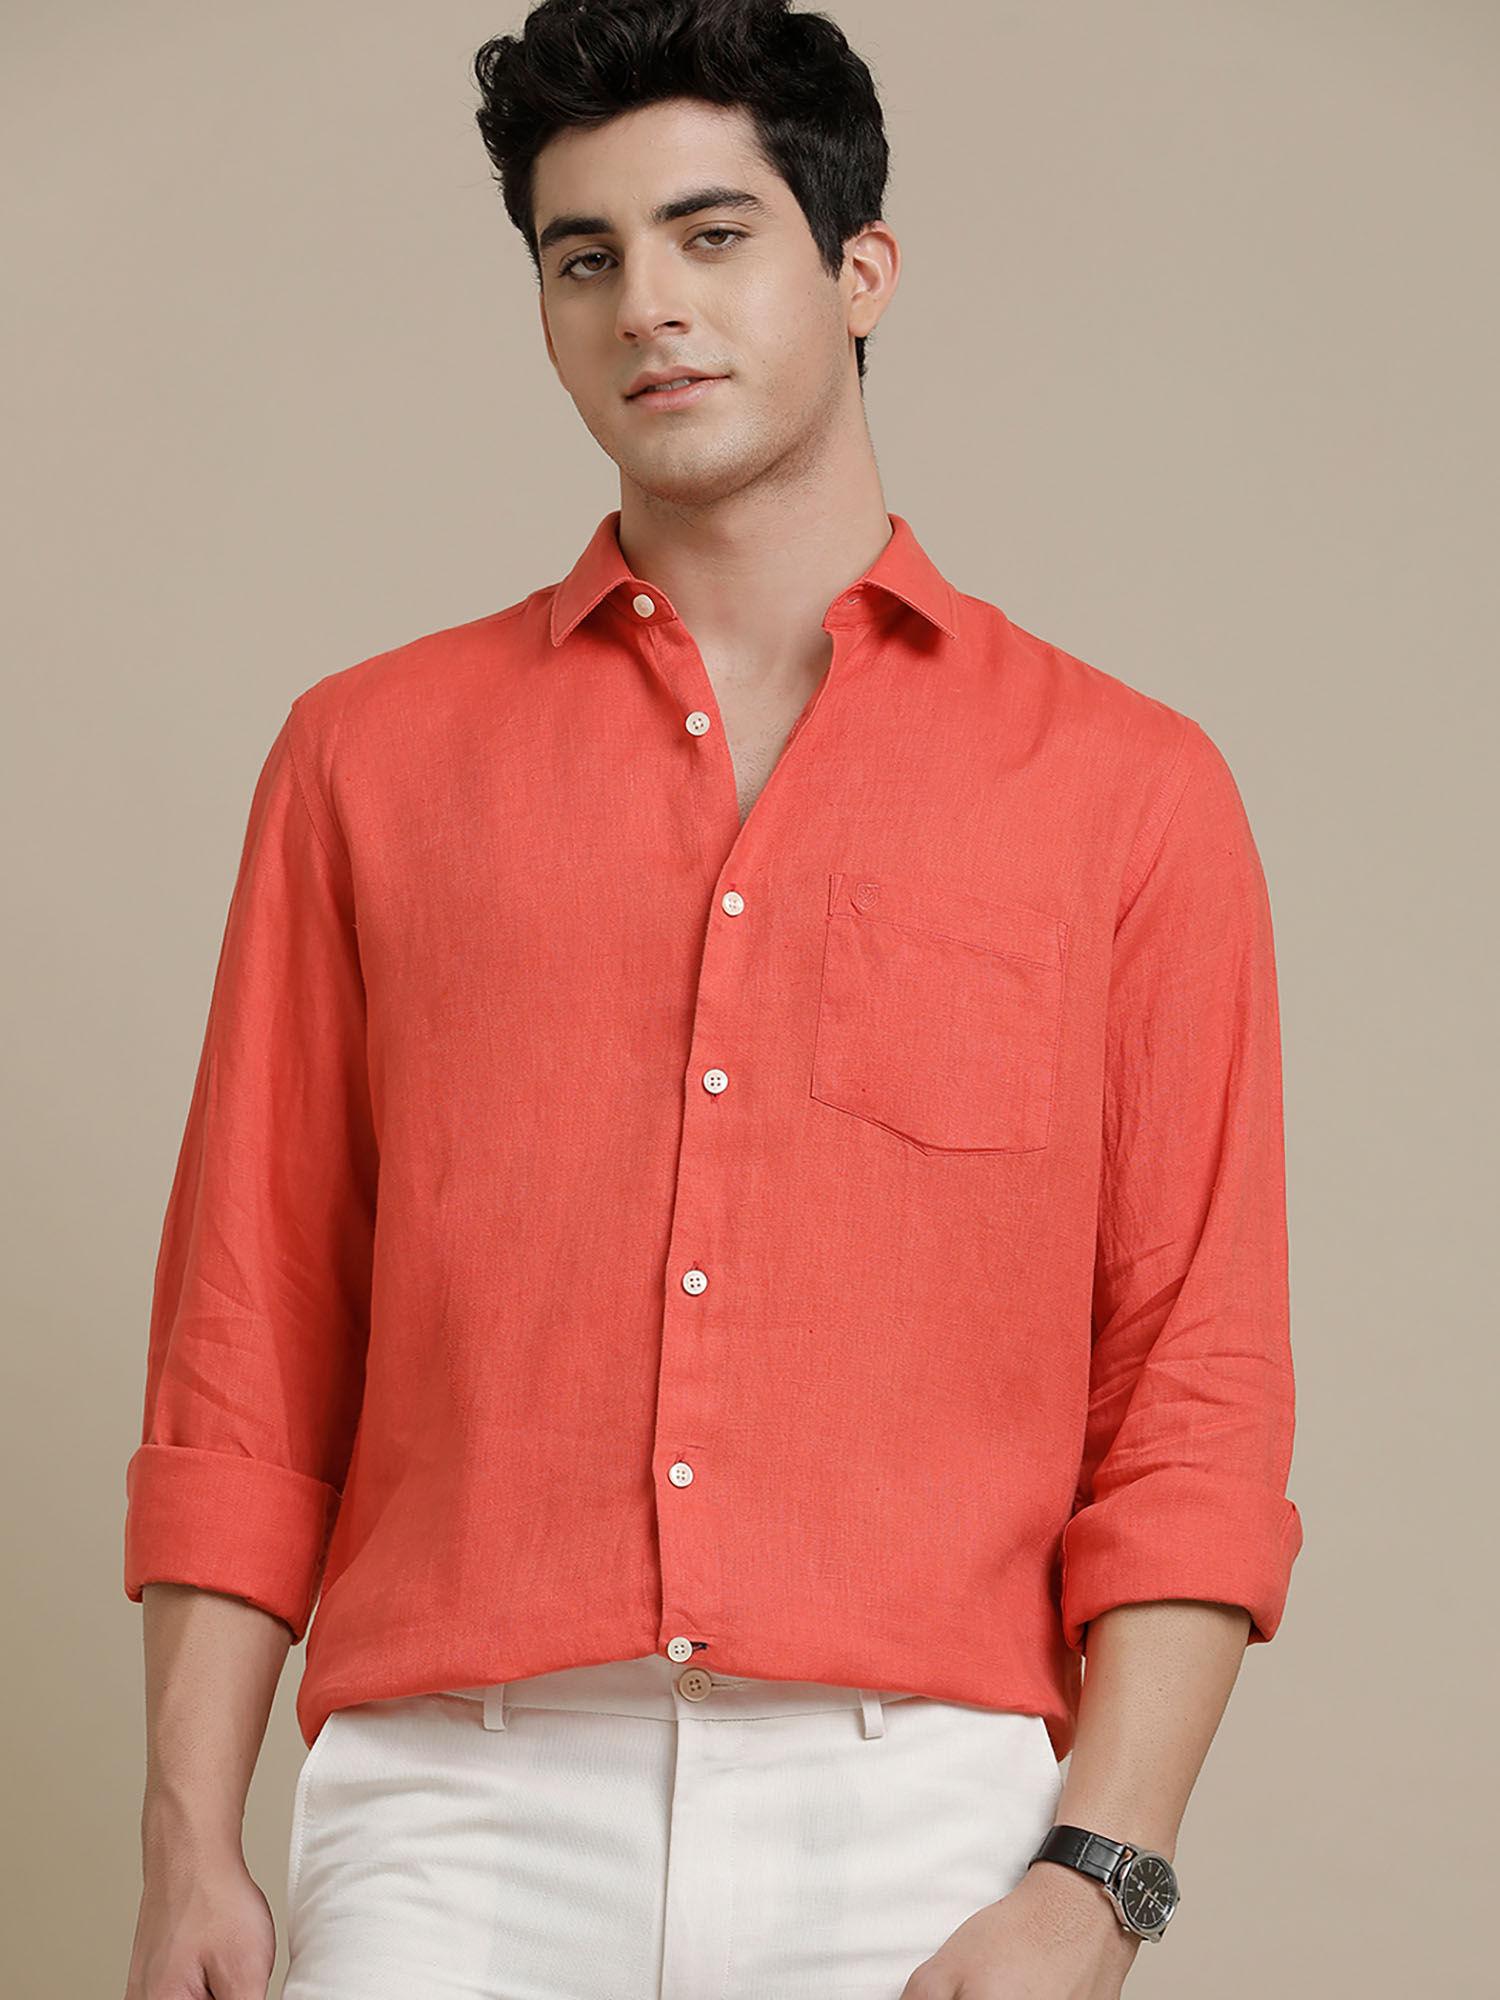 men's pure linen red solid regular fit full sleeve casual shirt